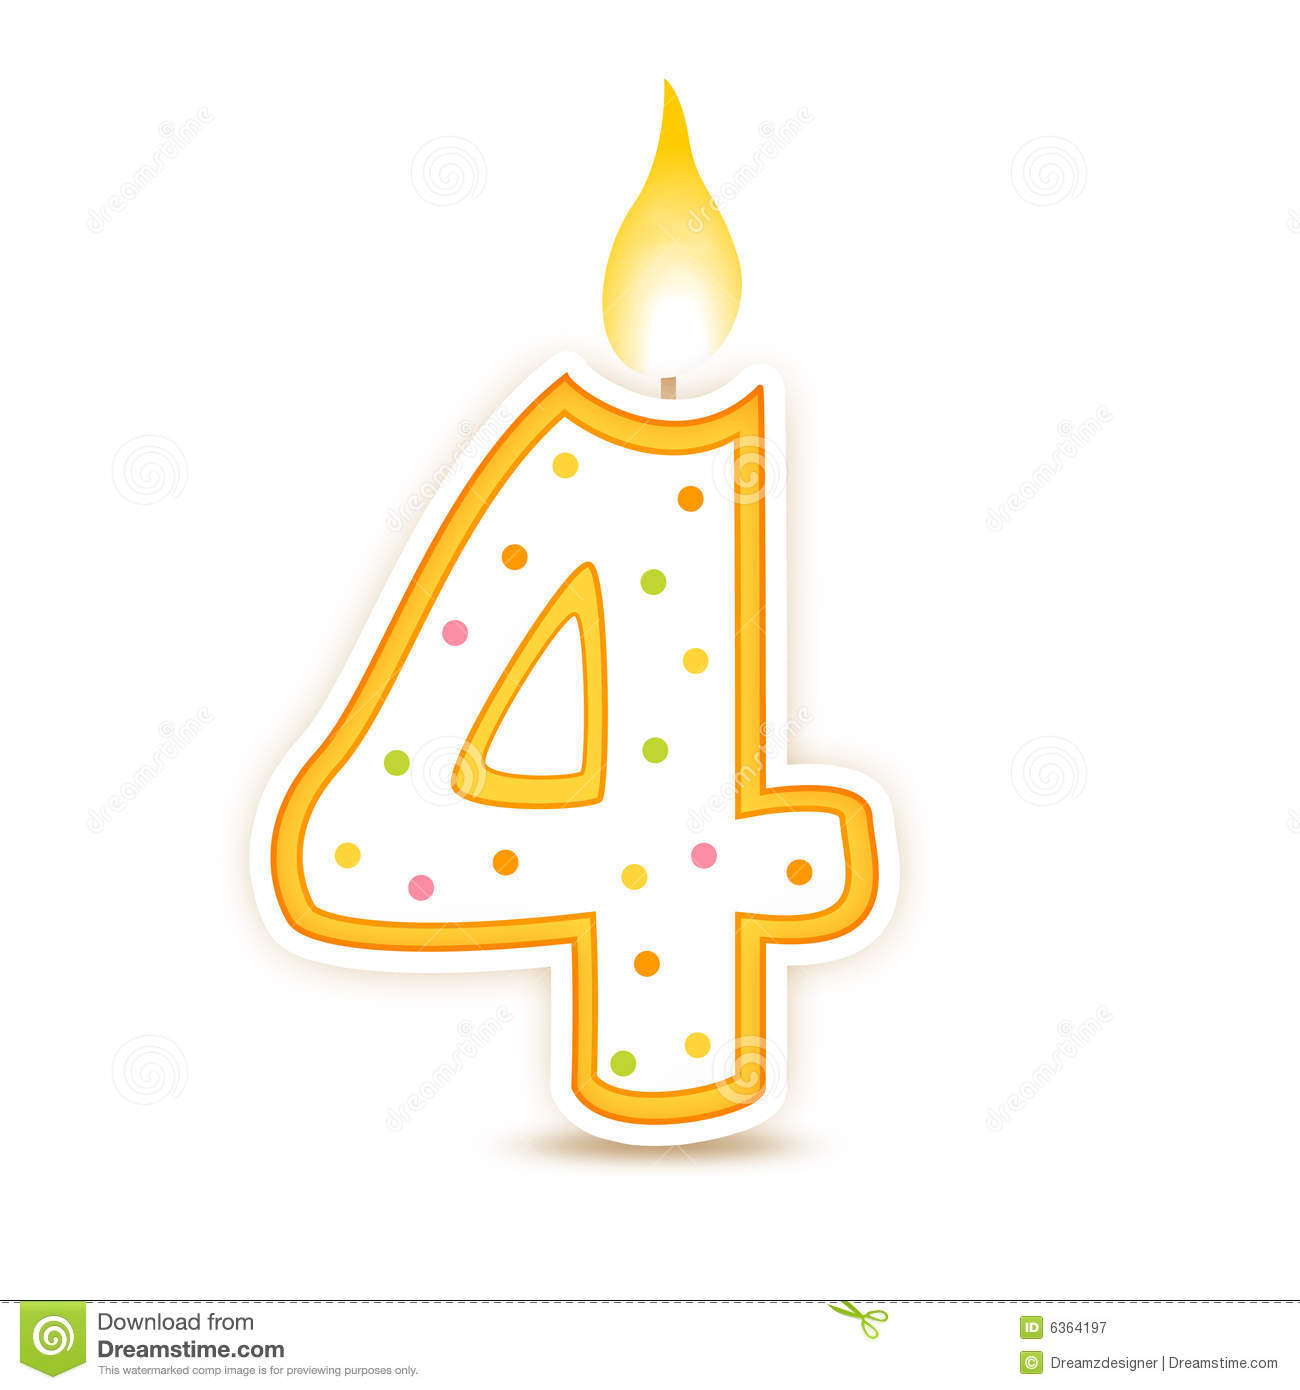 Birthday Candle   4 Royalty Free Stock Photography   Image  6364197